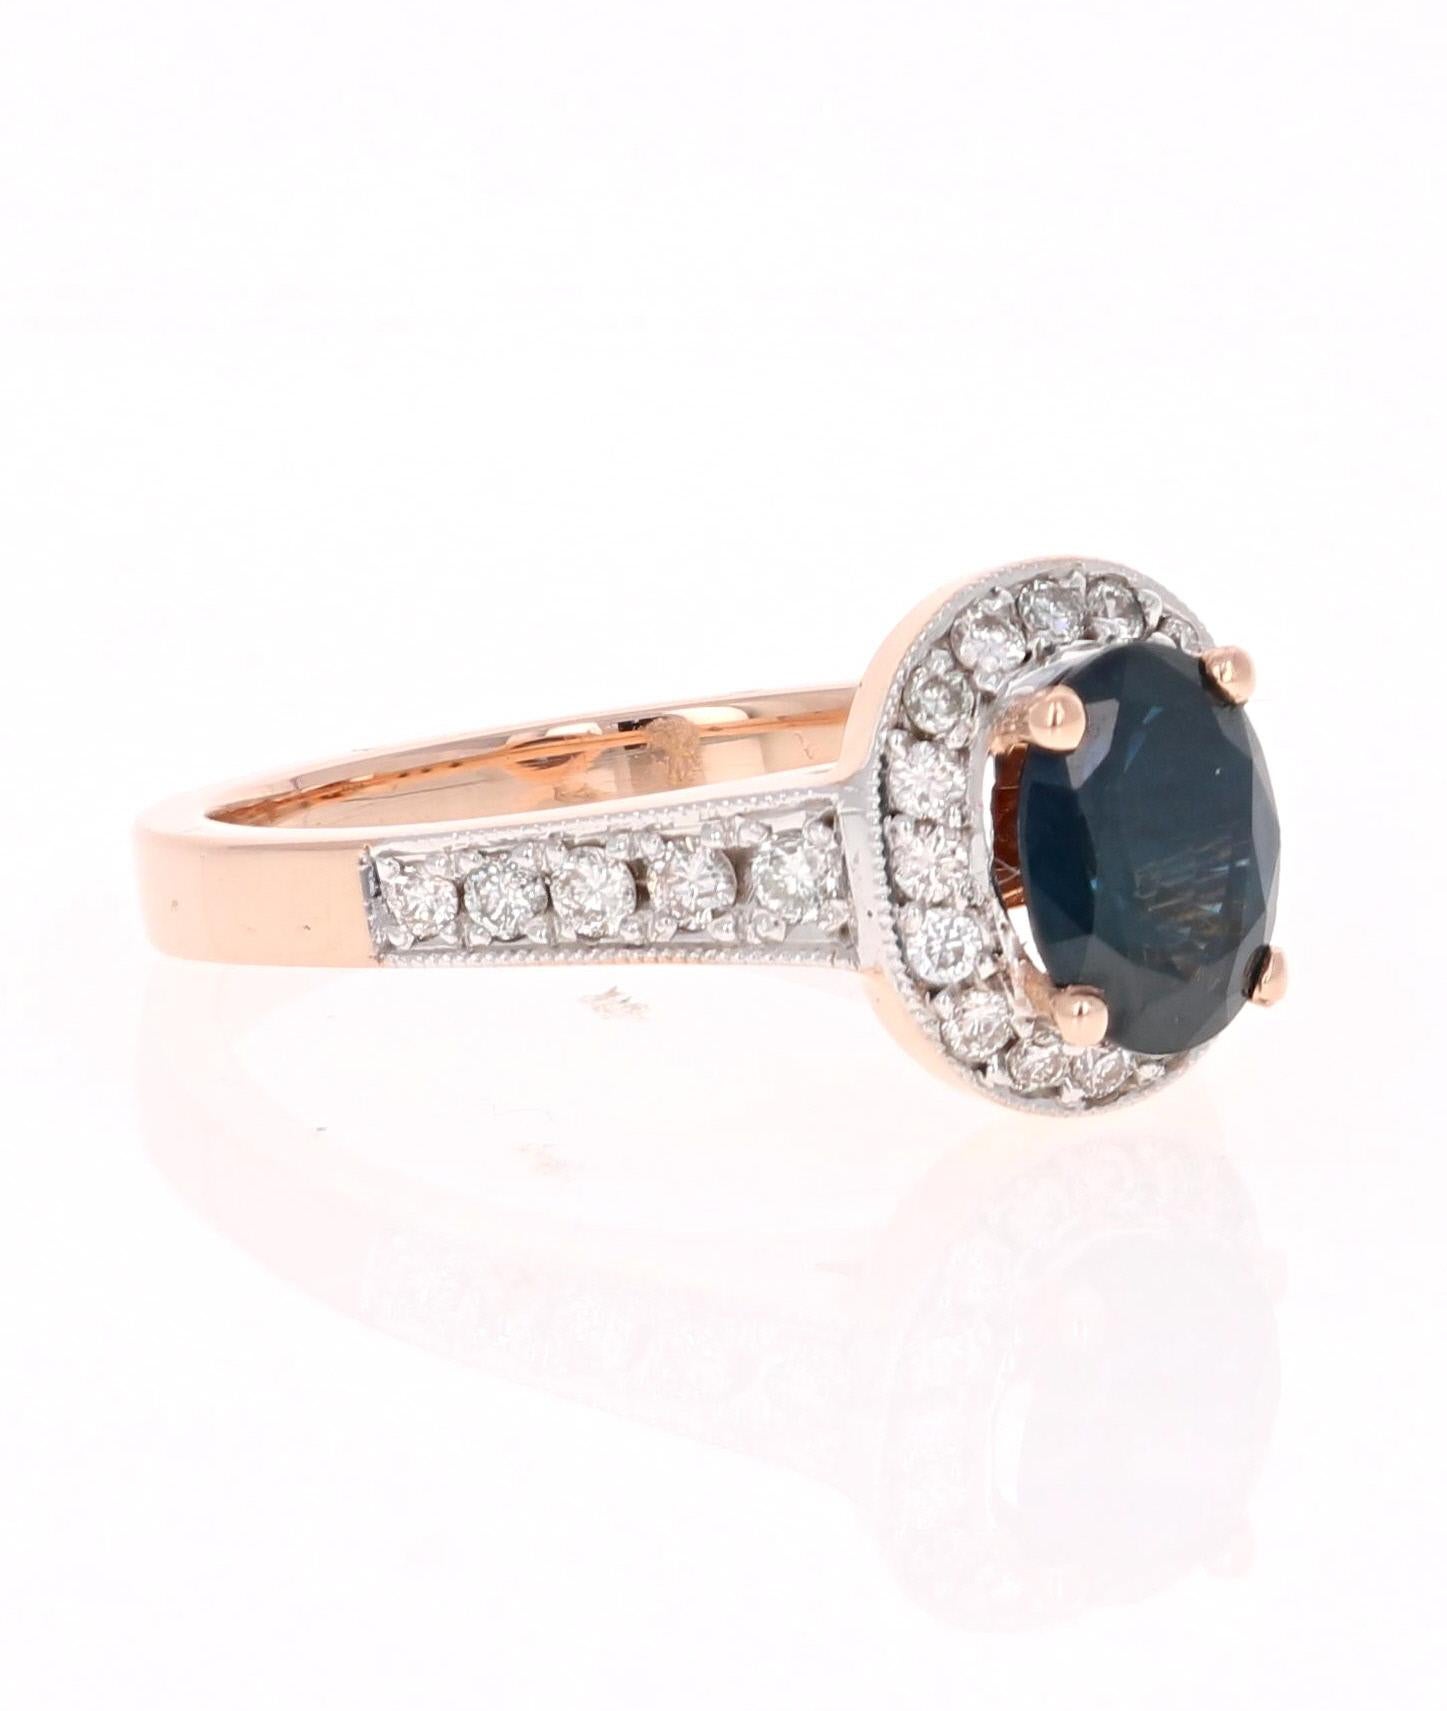 Beautiful Blue Sapphire and Diamond Ring!  This ring has a Oval Cut Sapphire set in the center of the ring that weighs 1.35 Carats. It is surrounded by 26 Round Cut Diamonds that weigh 0.40 Carats.The total carat weight of the ring is 1.75 carats.